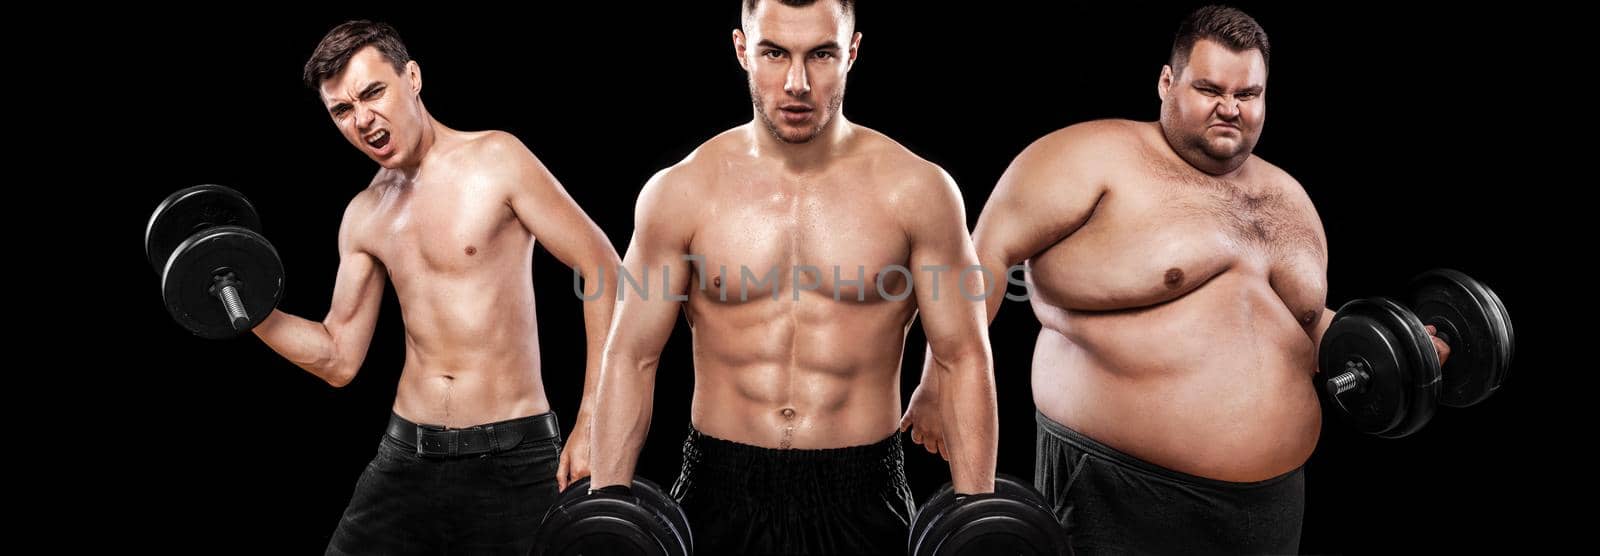 Before and after result. Group of three young sports men - fitness models holds the dumbbell on black background. Fat, fit and athletic men. Ectomorph, mesomorph and endomorph .